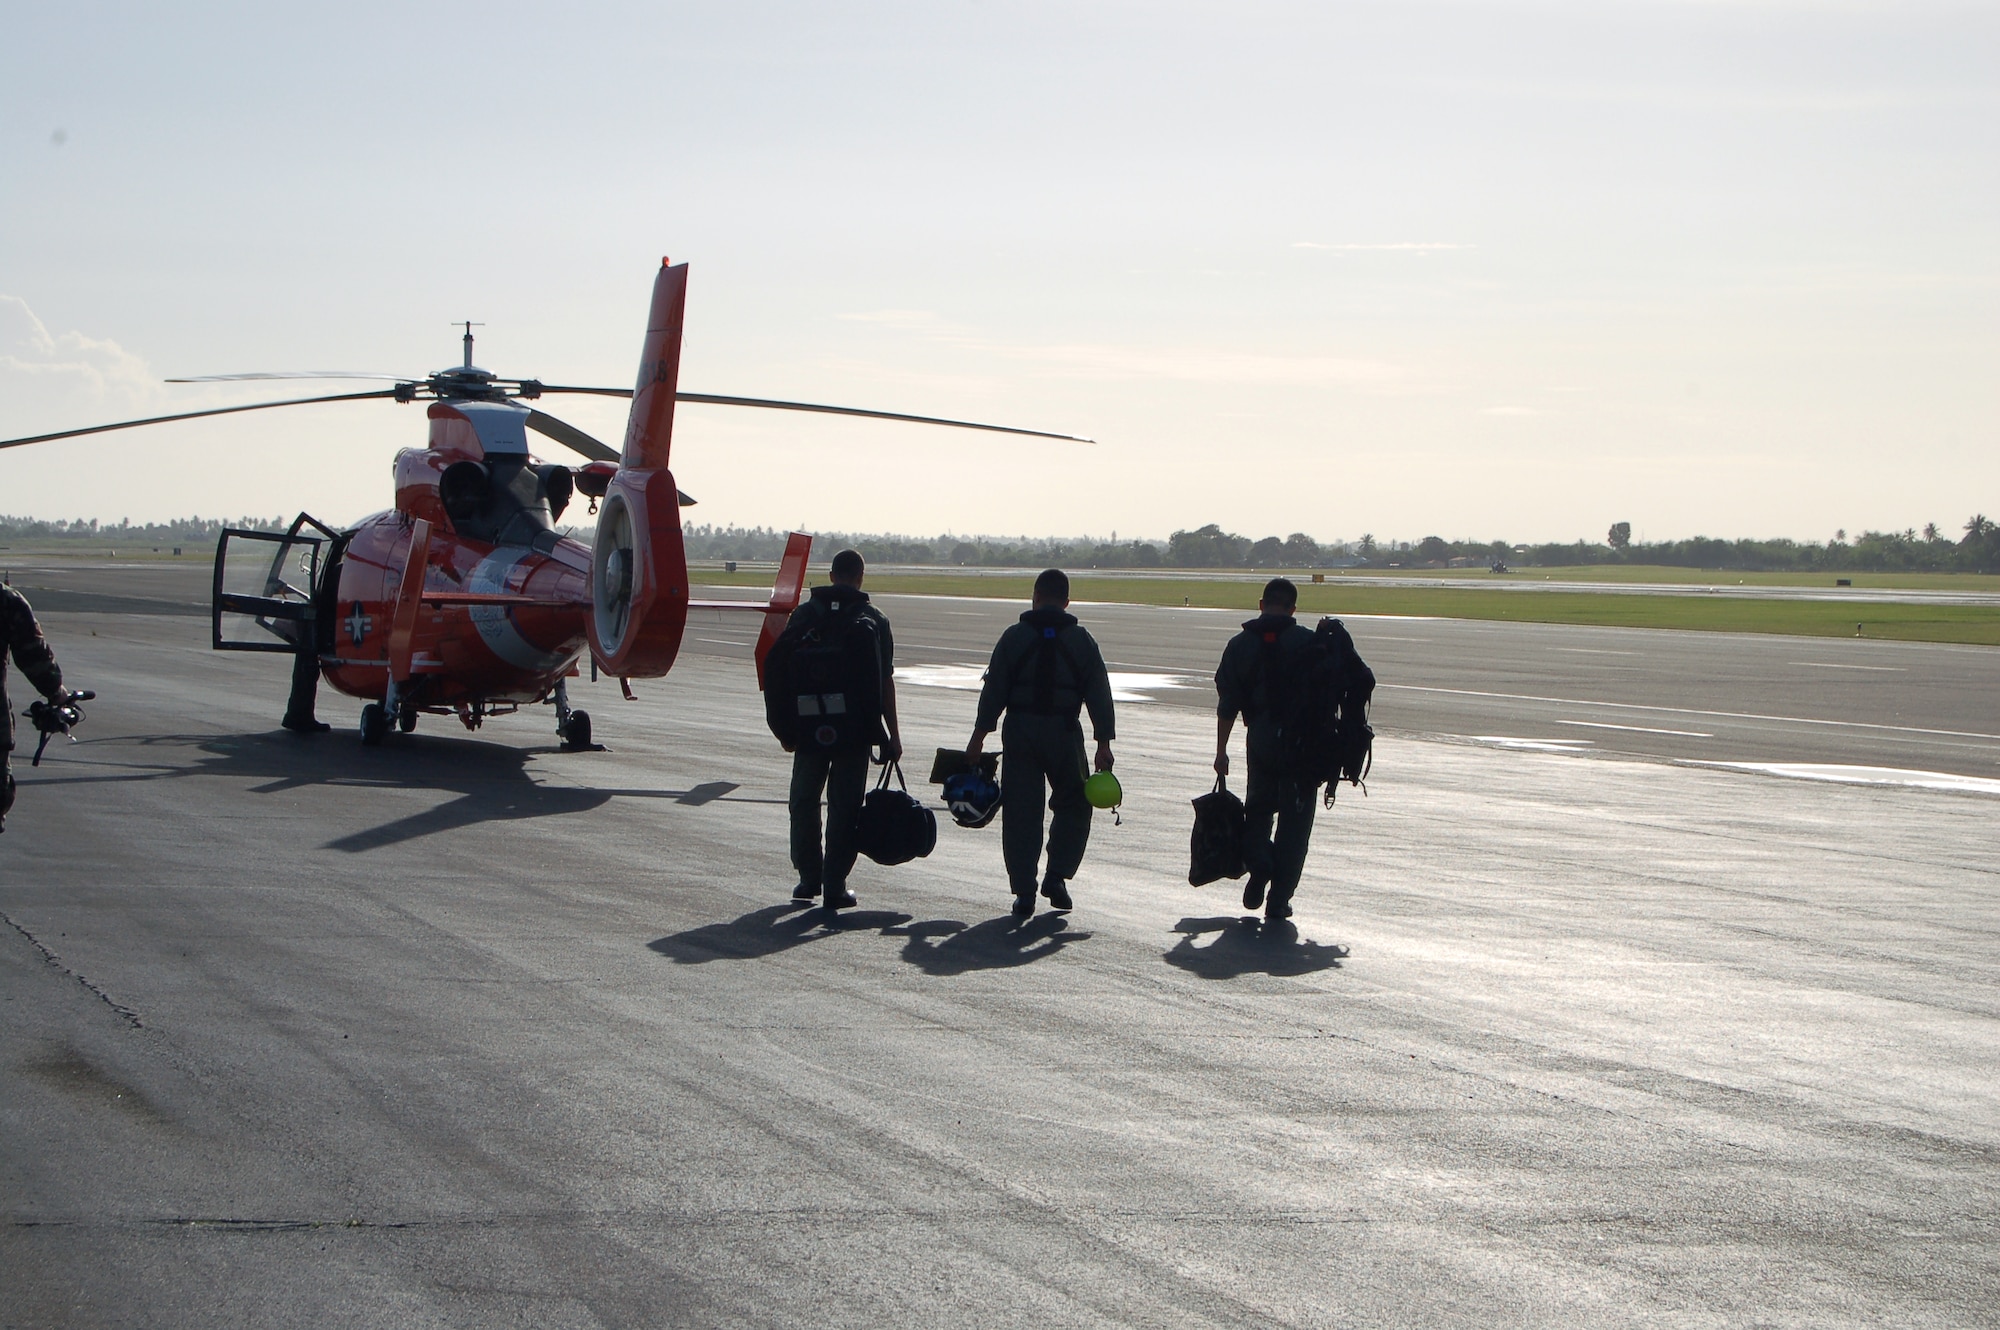 Coast Guard Lt. Cmdr. Juan Lopez (center) and two other Coast Guardsmen walk out to an HH-65C Dolphin March 21 at Coast Guard Air Station Borinquen, Puerto Rico. Their mission was to work with the Puerto Rican Police Department and help them train on how to dive out from a helicopter to rescue people at sea. A former Senior Airman, Commander Lopez is an aircraft commander and the assistant operations officer at the air station. Coast Guard Air Station Borinquen is based at what used to be Ramey Air Force Base, which closed in 1973. (U.S. Air Force photo/Tech. Sgt. Ben Gonzales)